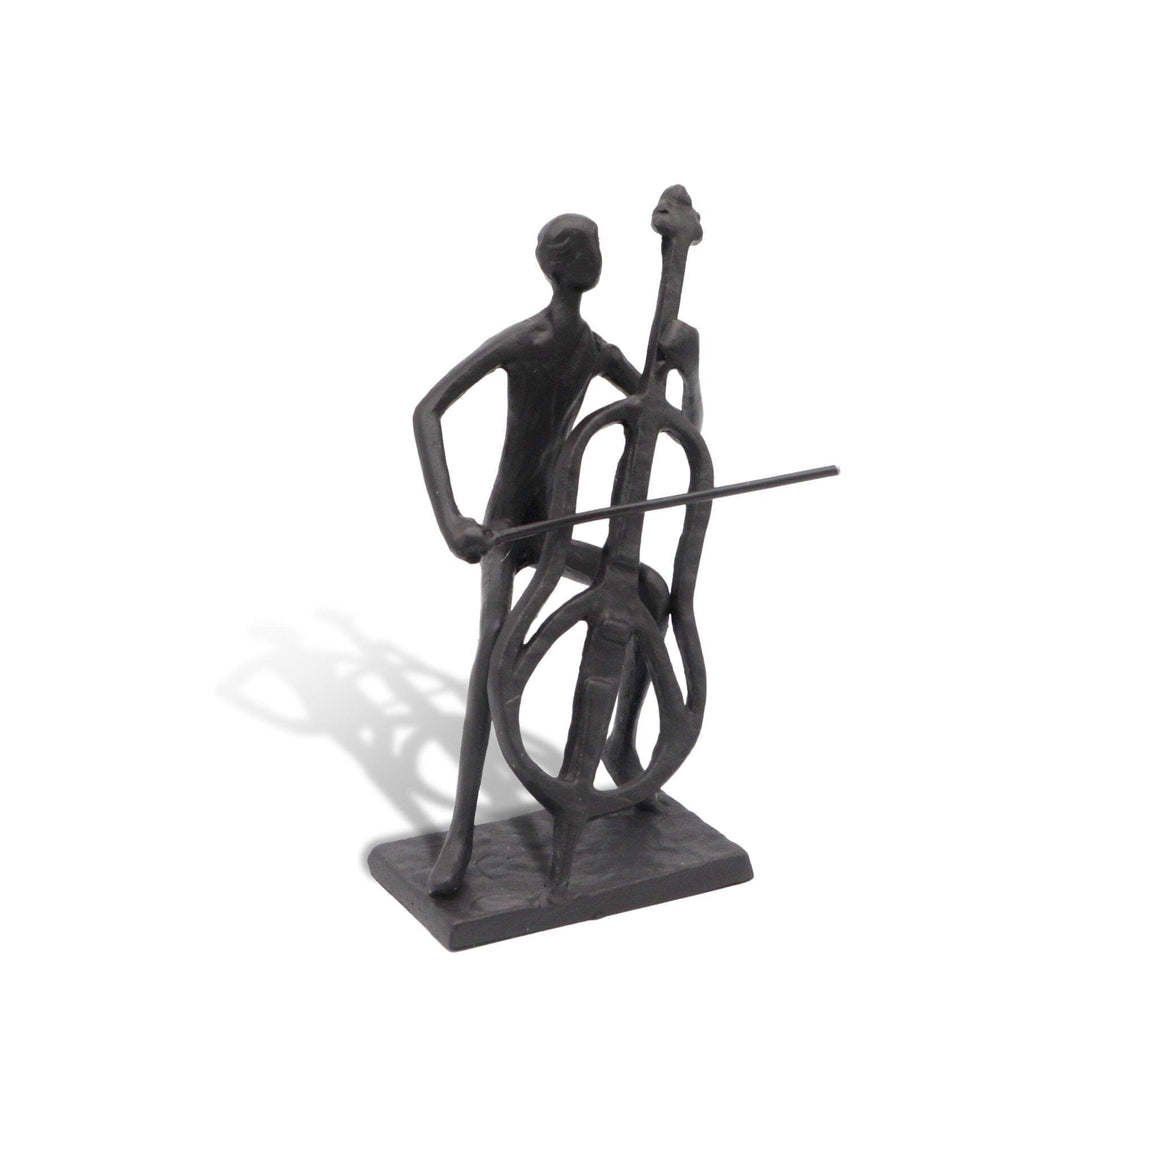 Musician Playing Cello Sculpture Figurine - Cast Iron - Abstract - Rustic Deco Incorporated